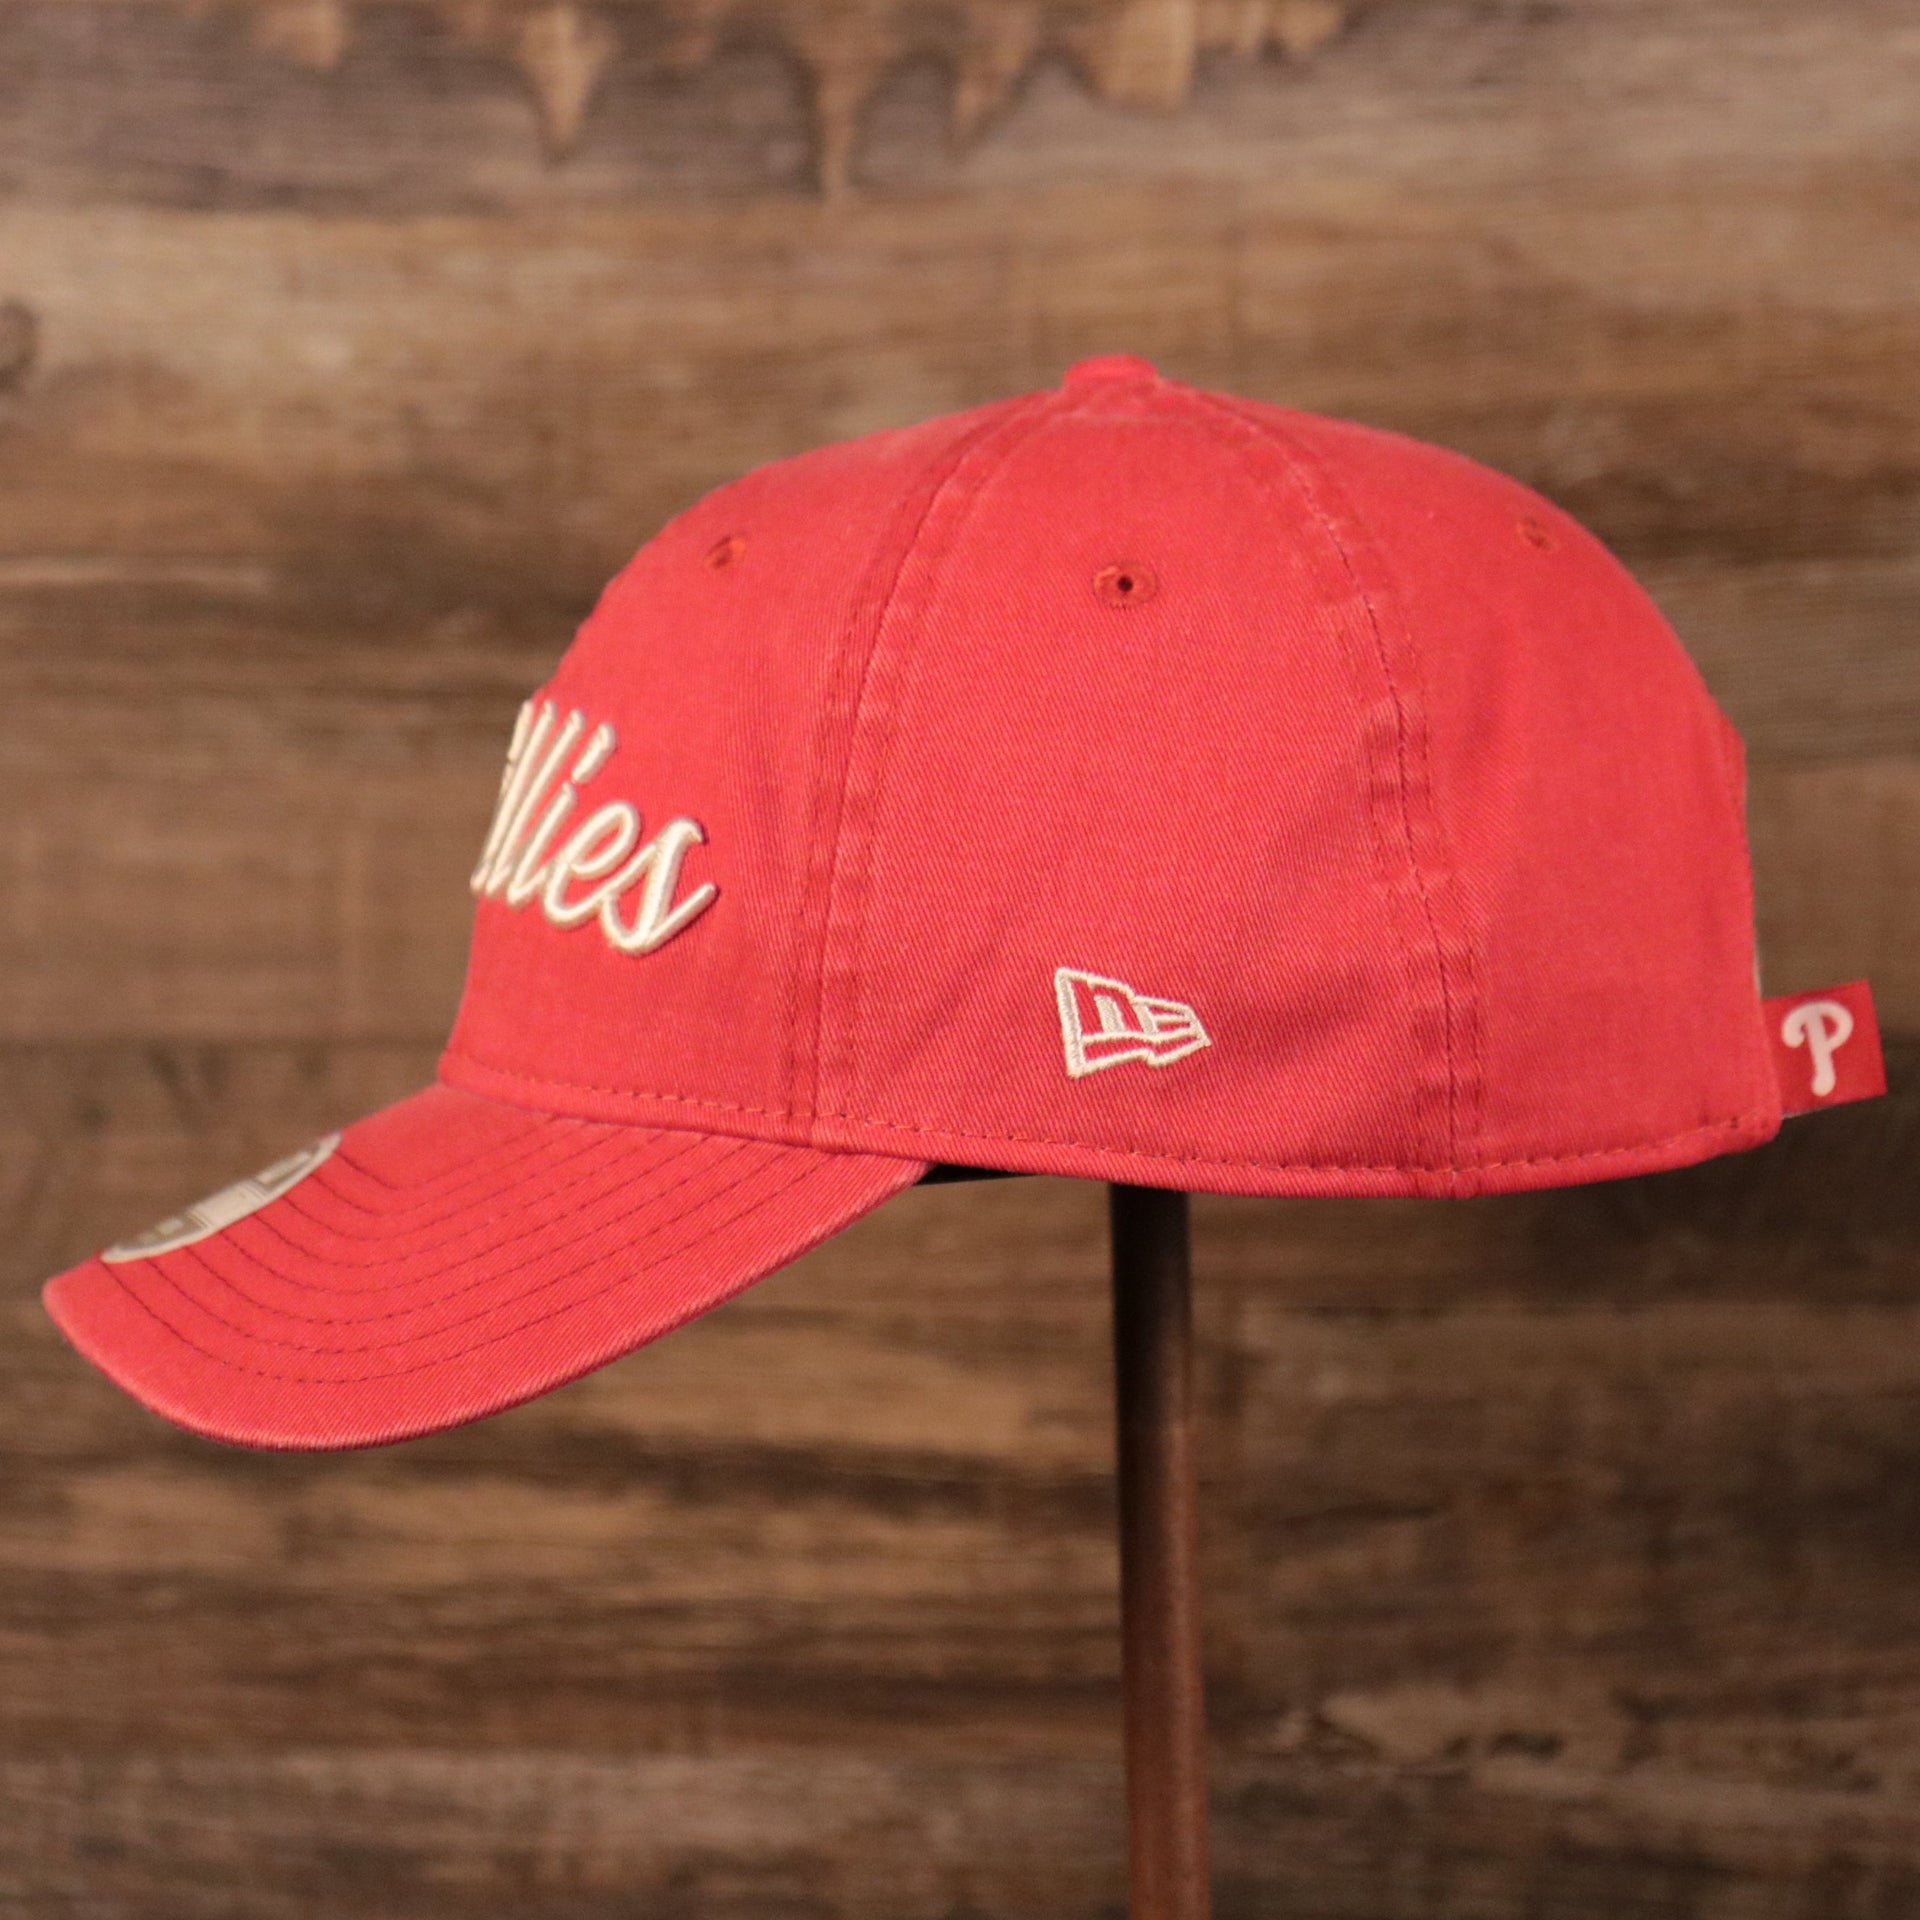 The New Era white logo on the wearer's left side of the washed pink ball cap for women.